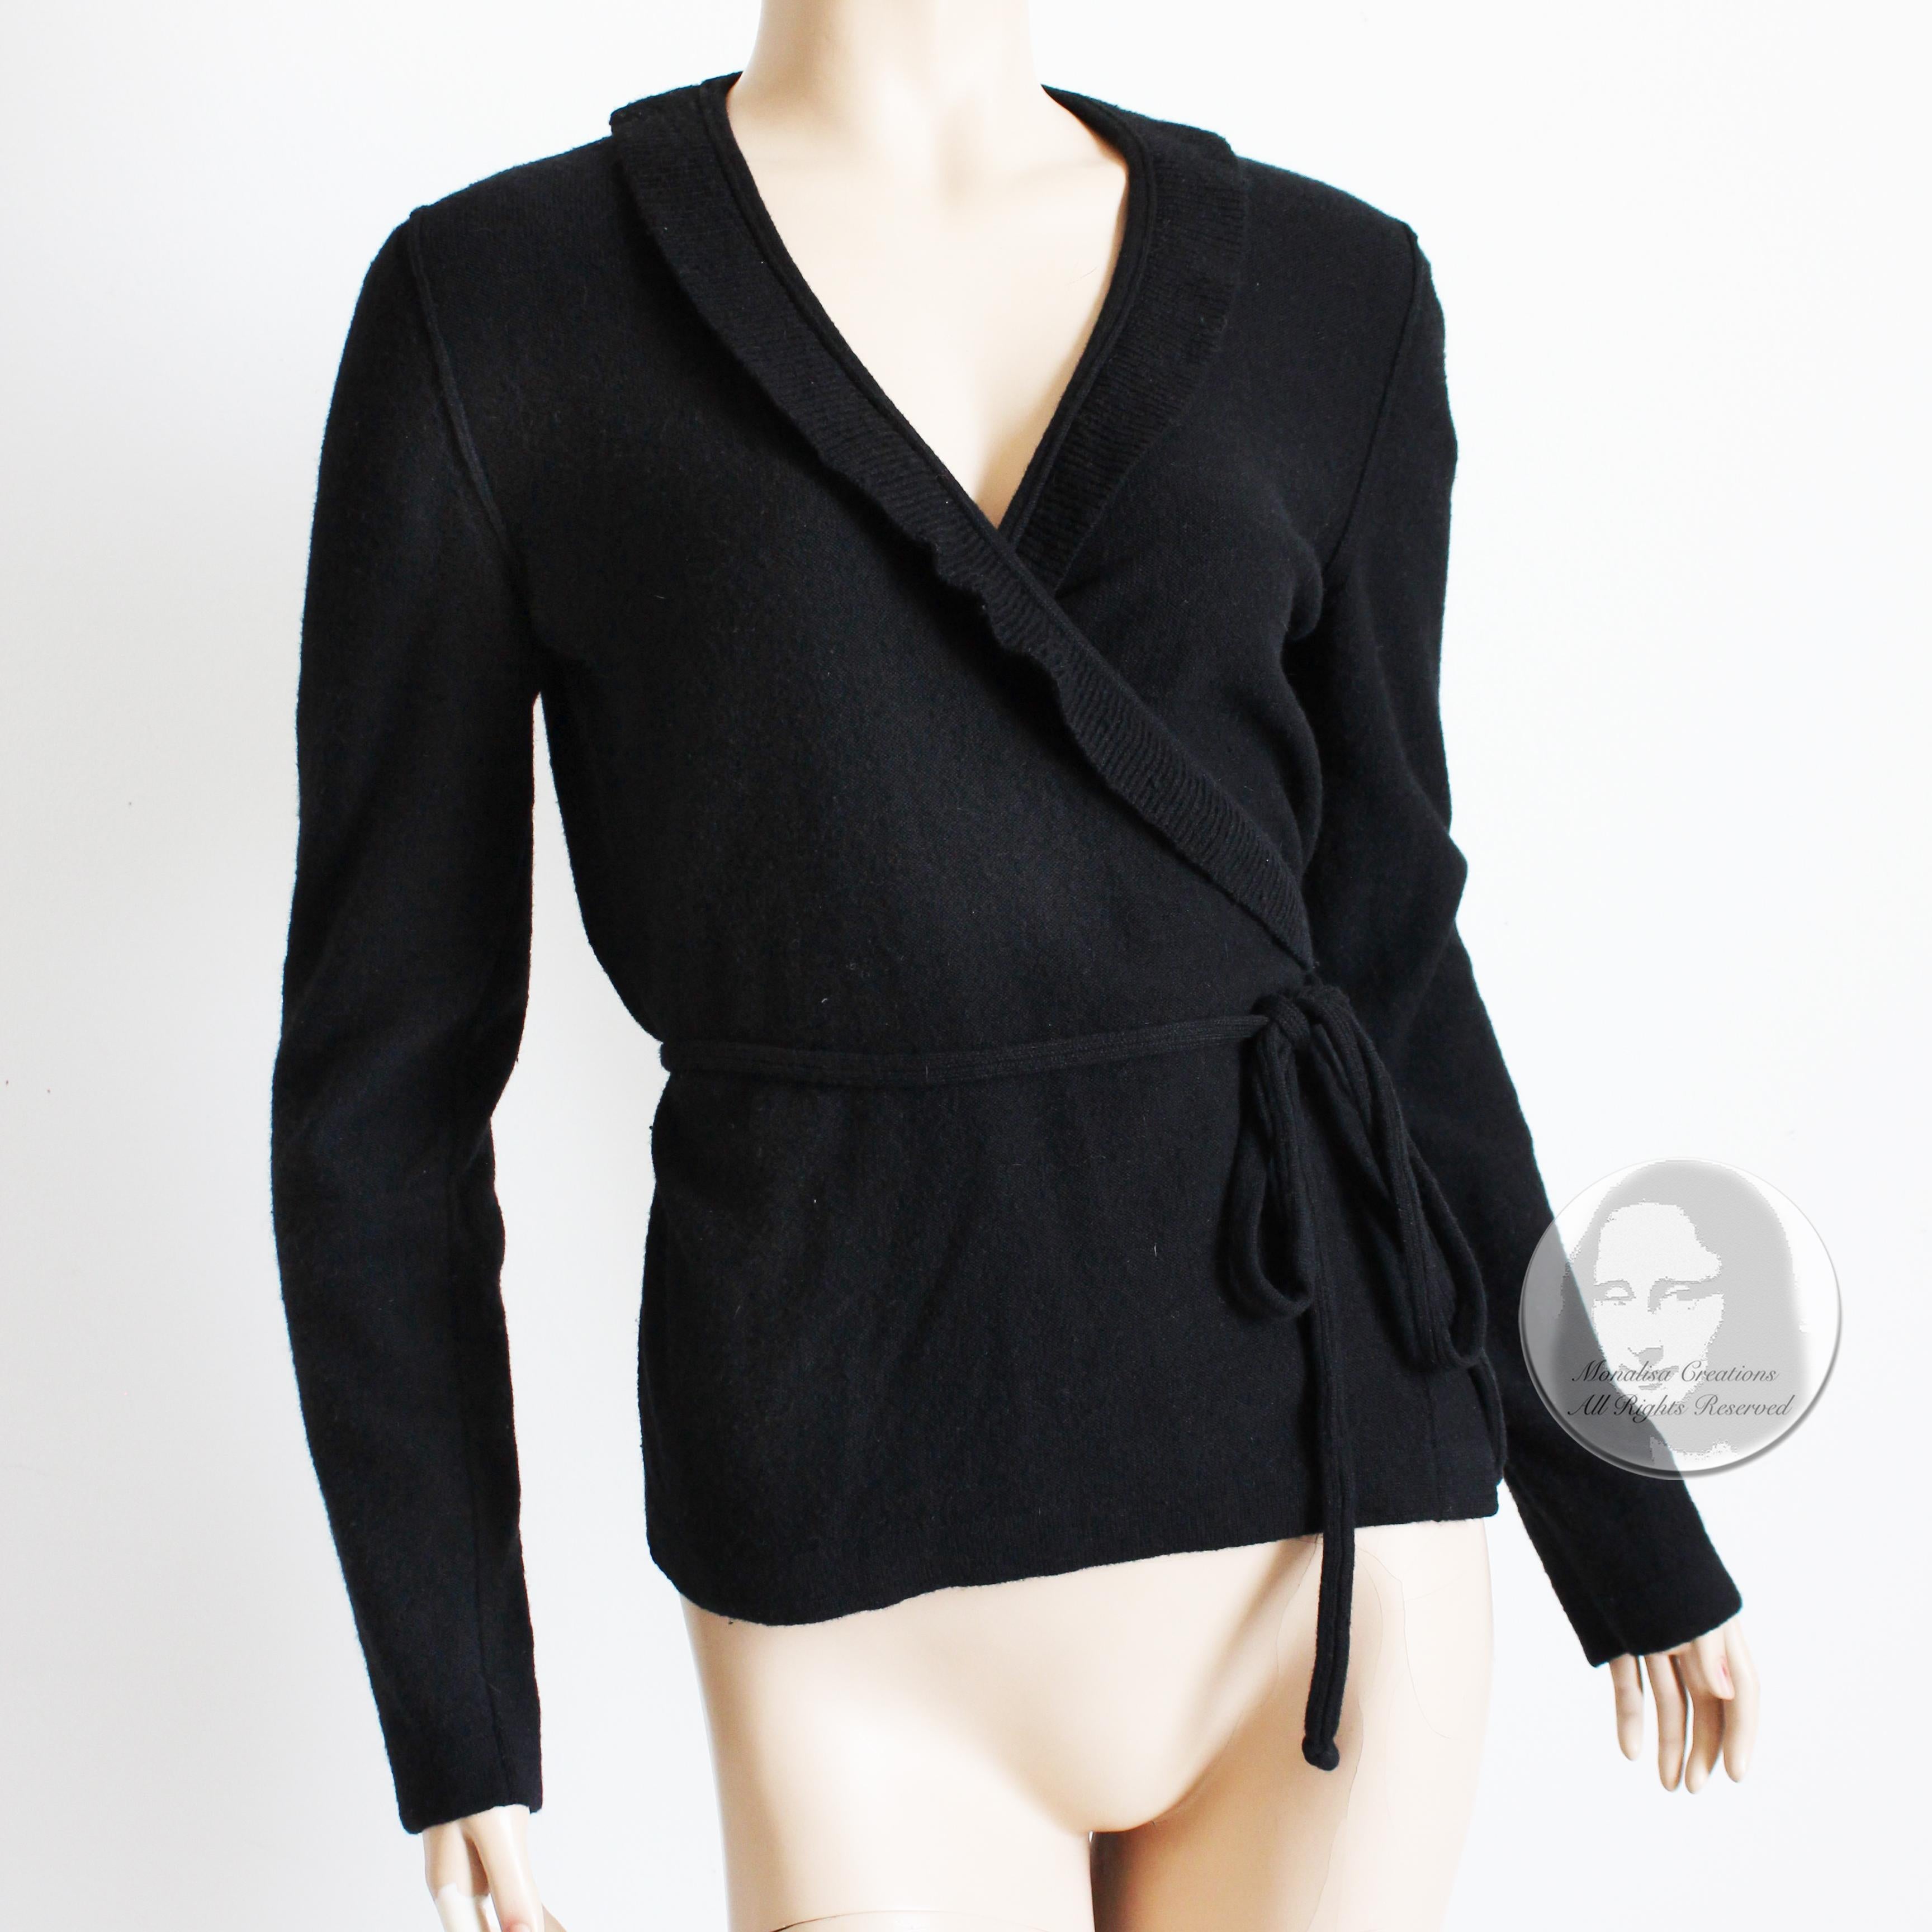 Preowned, vintage wrap style cardigan sweater by Sonia Rykiel Paris, likely made in the 90s. Made from a black wool and angora knit, it fastens wrap style with skinny knit ties.  

Simple, chic and elegant - a hallmark of the designer! Wear this